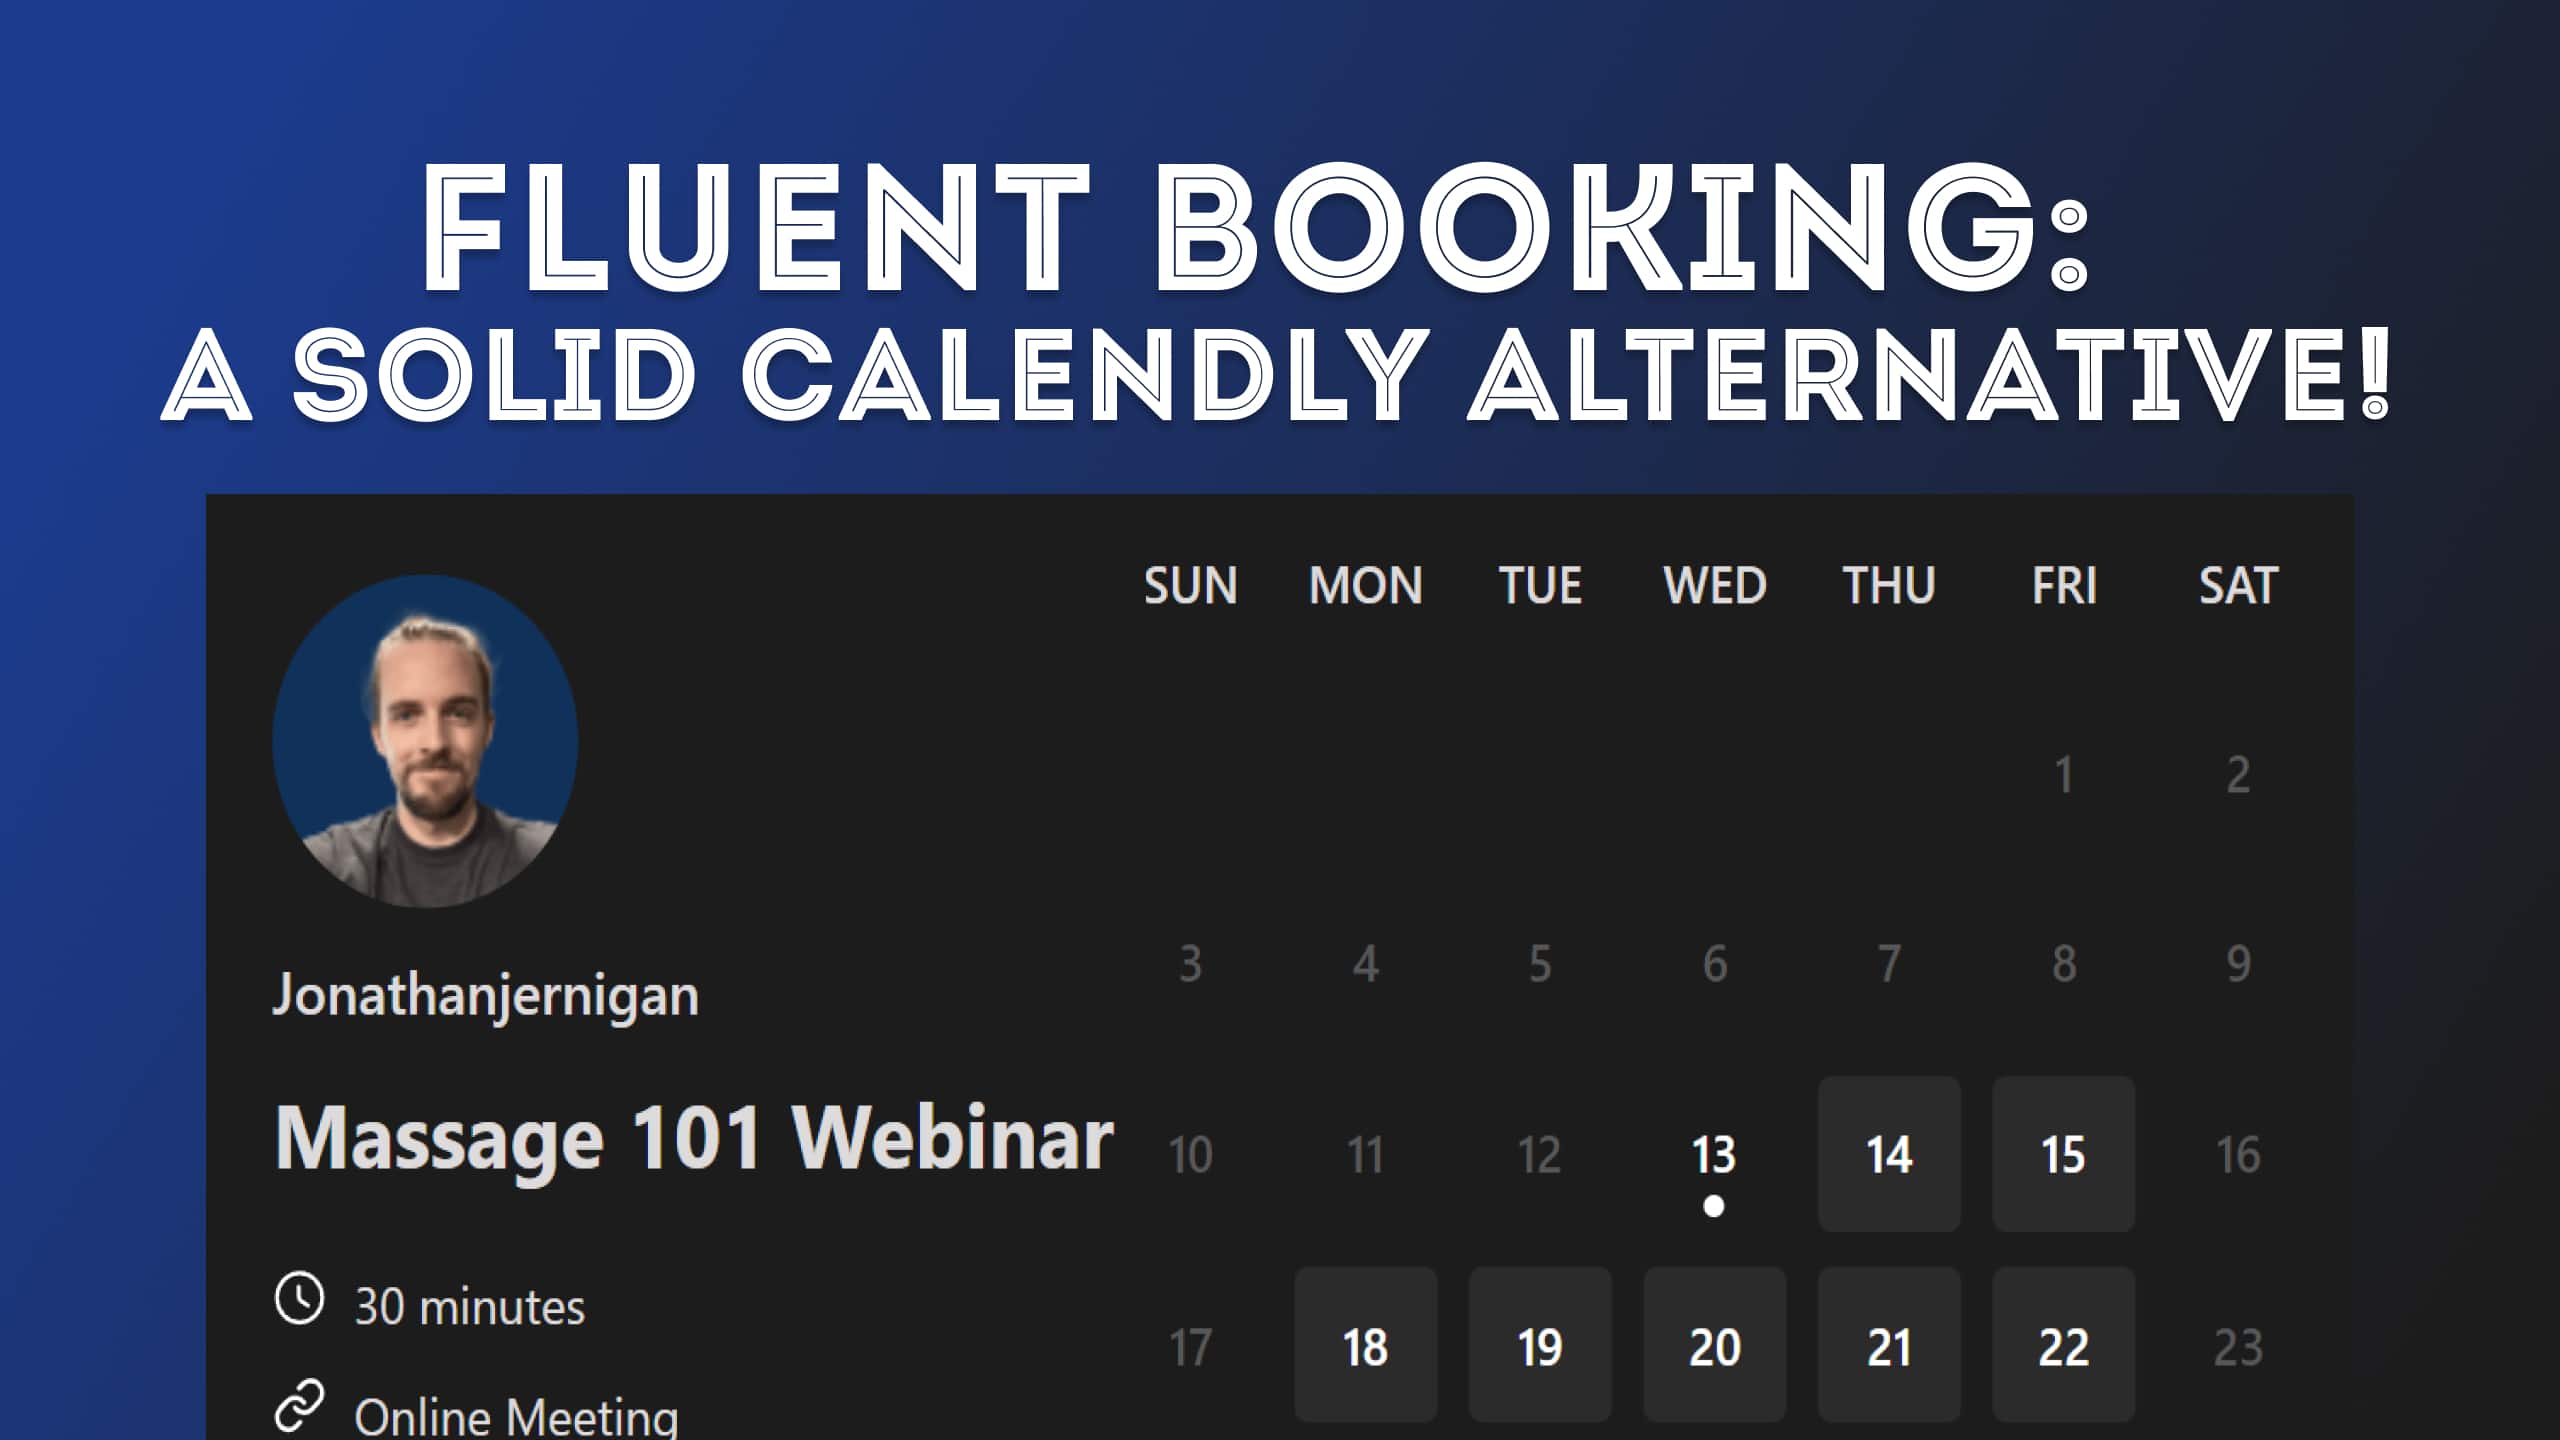 Fluent Booking First Look (1)